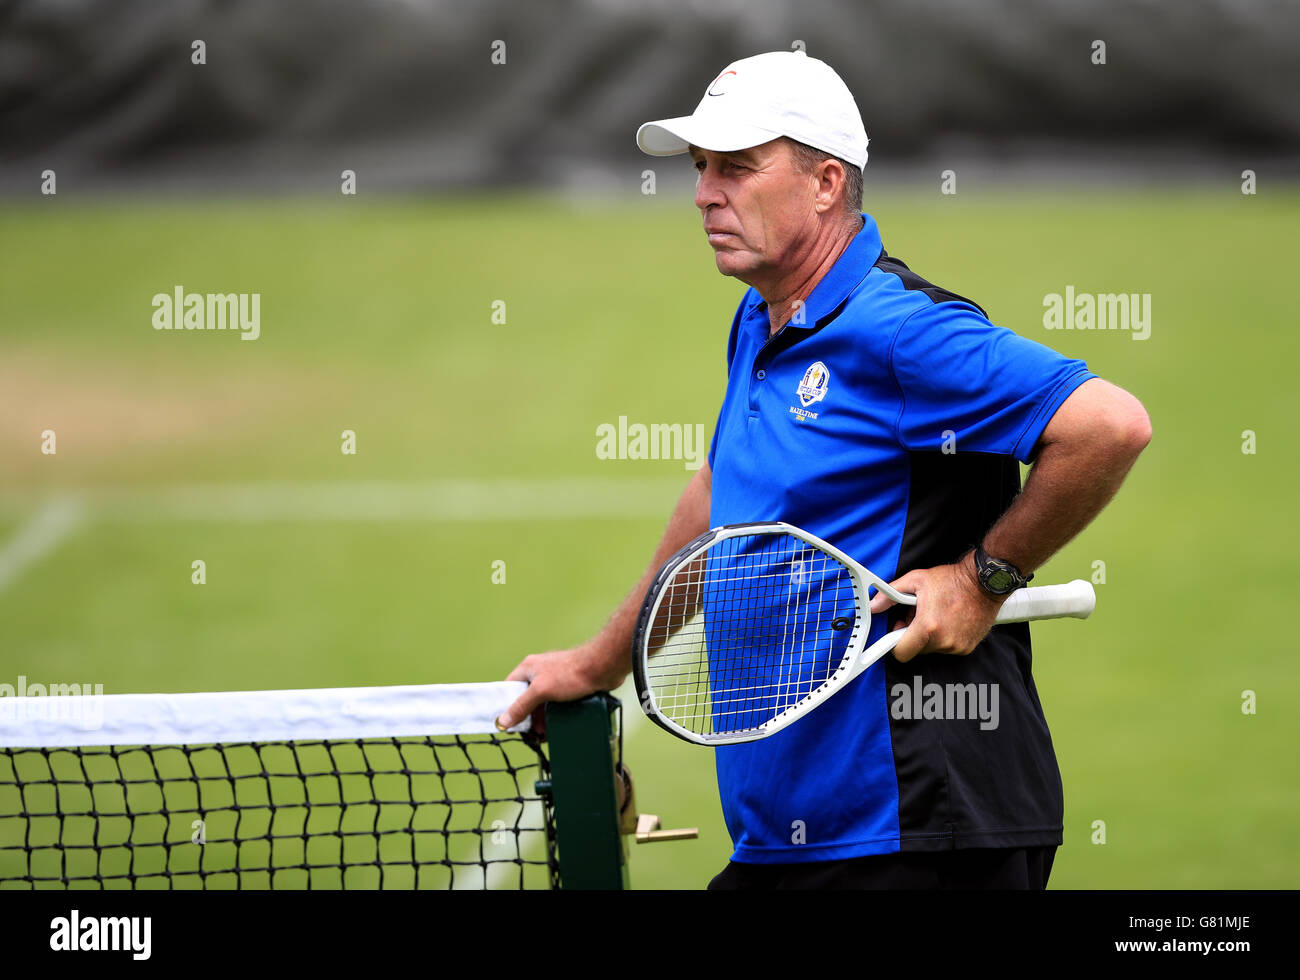 Ivan Lendl High Resolution Stock Photography and Images - Alamy